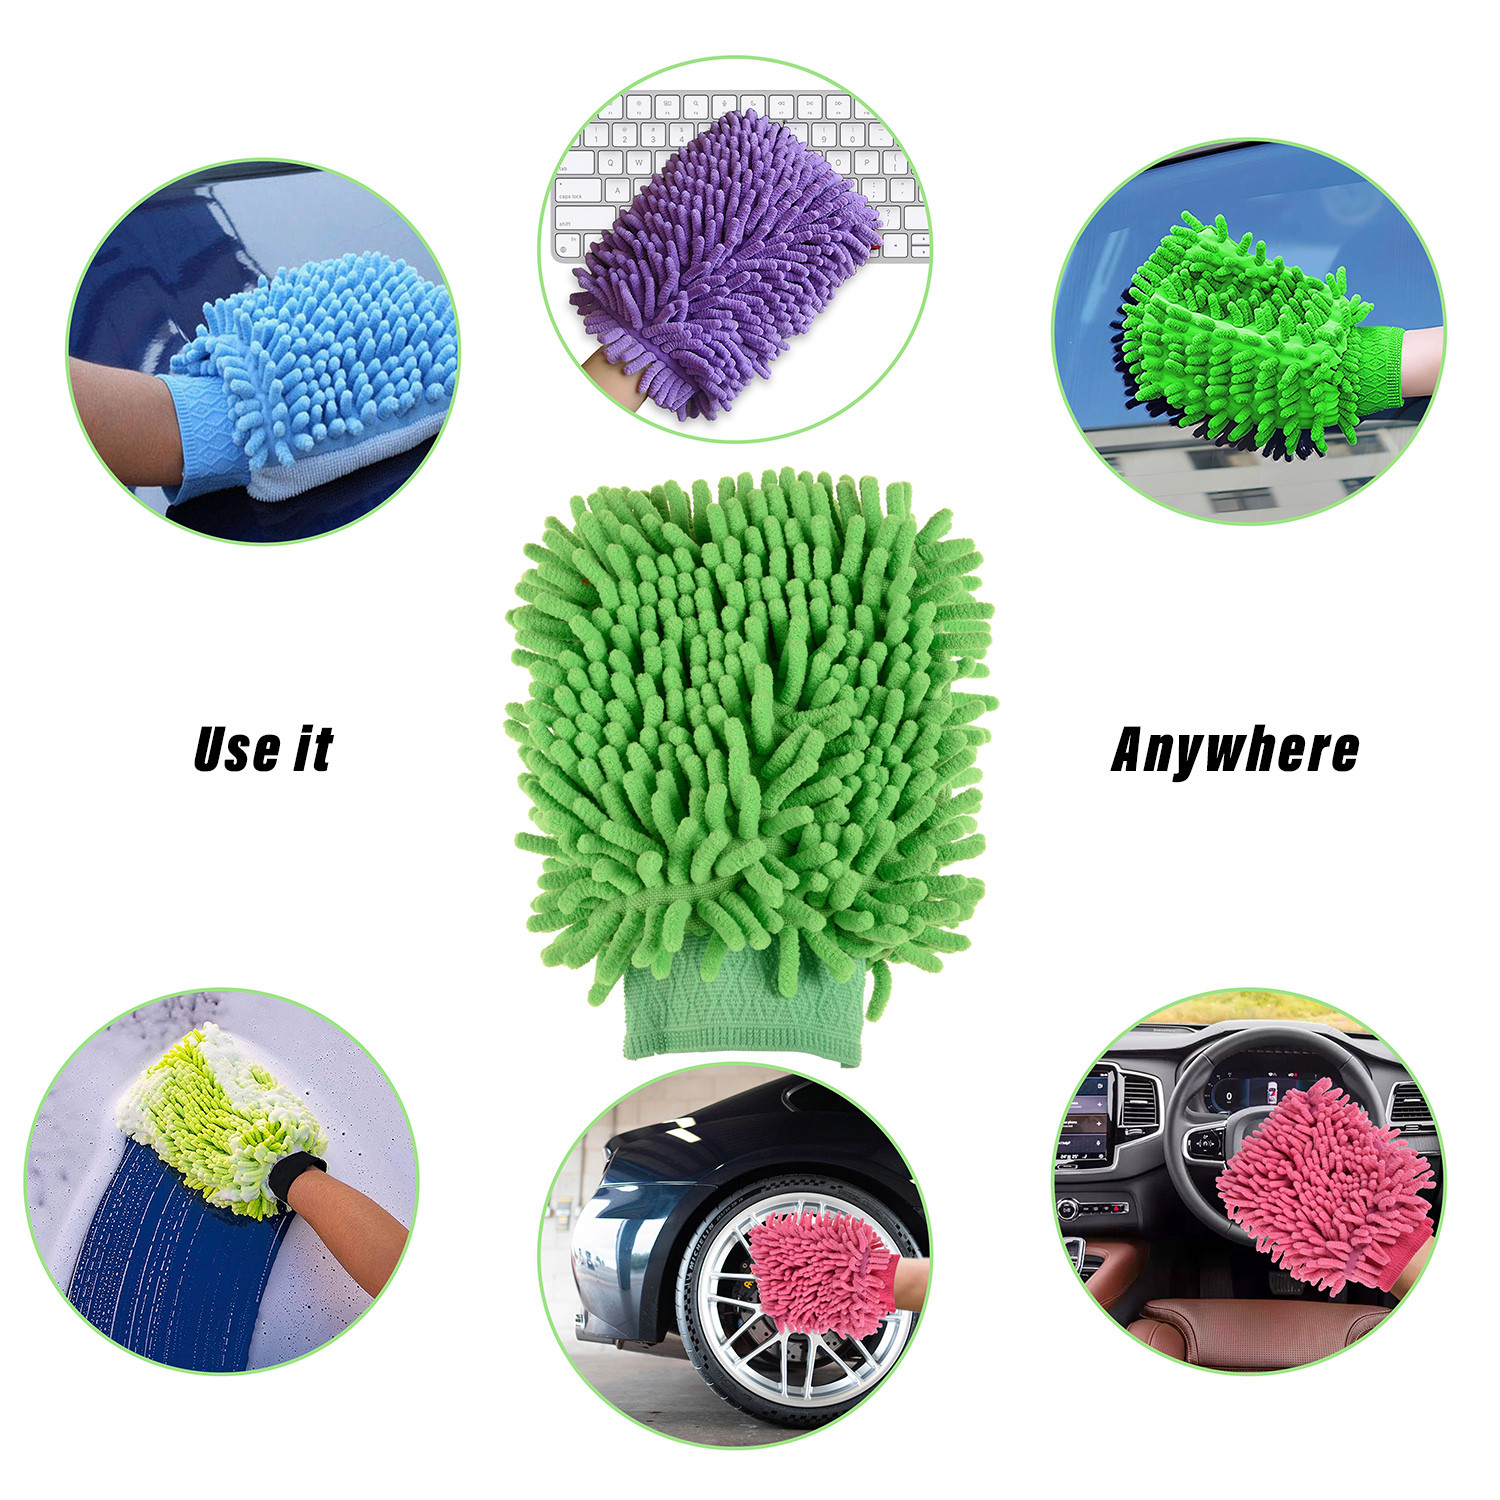 Kuber Industries Chenille Mitts|Microfiber Cleaning Gloves|Inside Waterproof Cloth Gloves|100 Gram Weighted Hand Duster|Chenille Gloves For Car|Glass|Pack of 2 (Purple & Green)